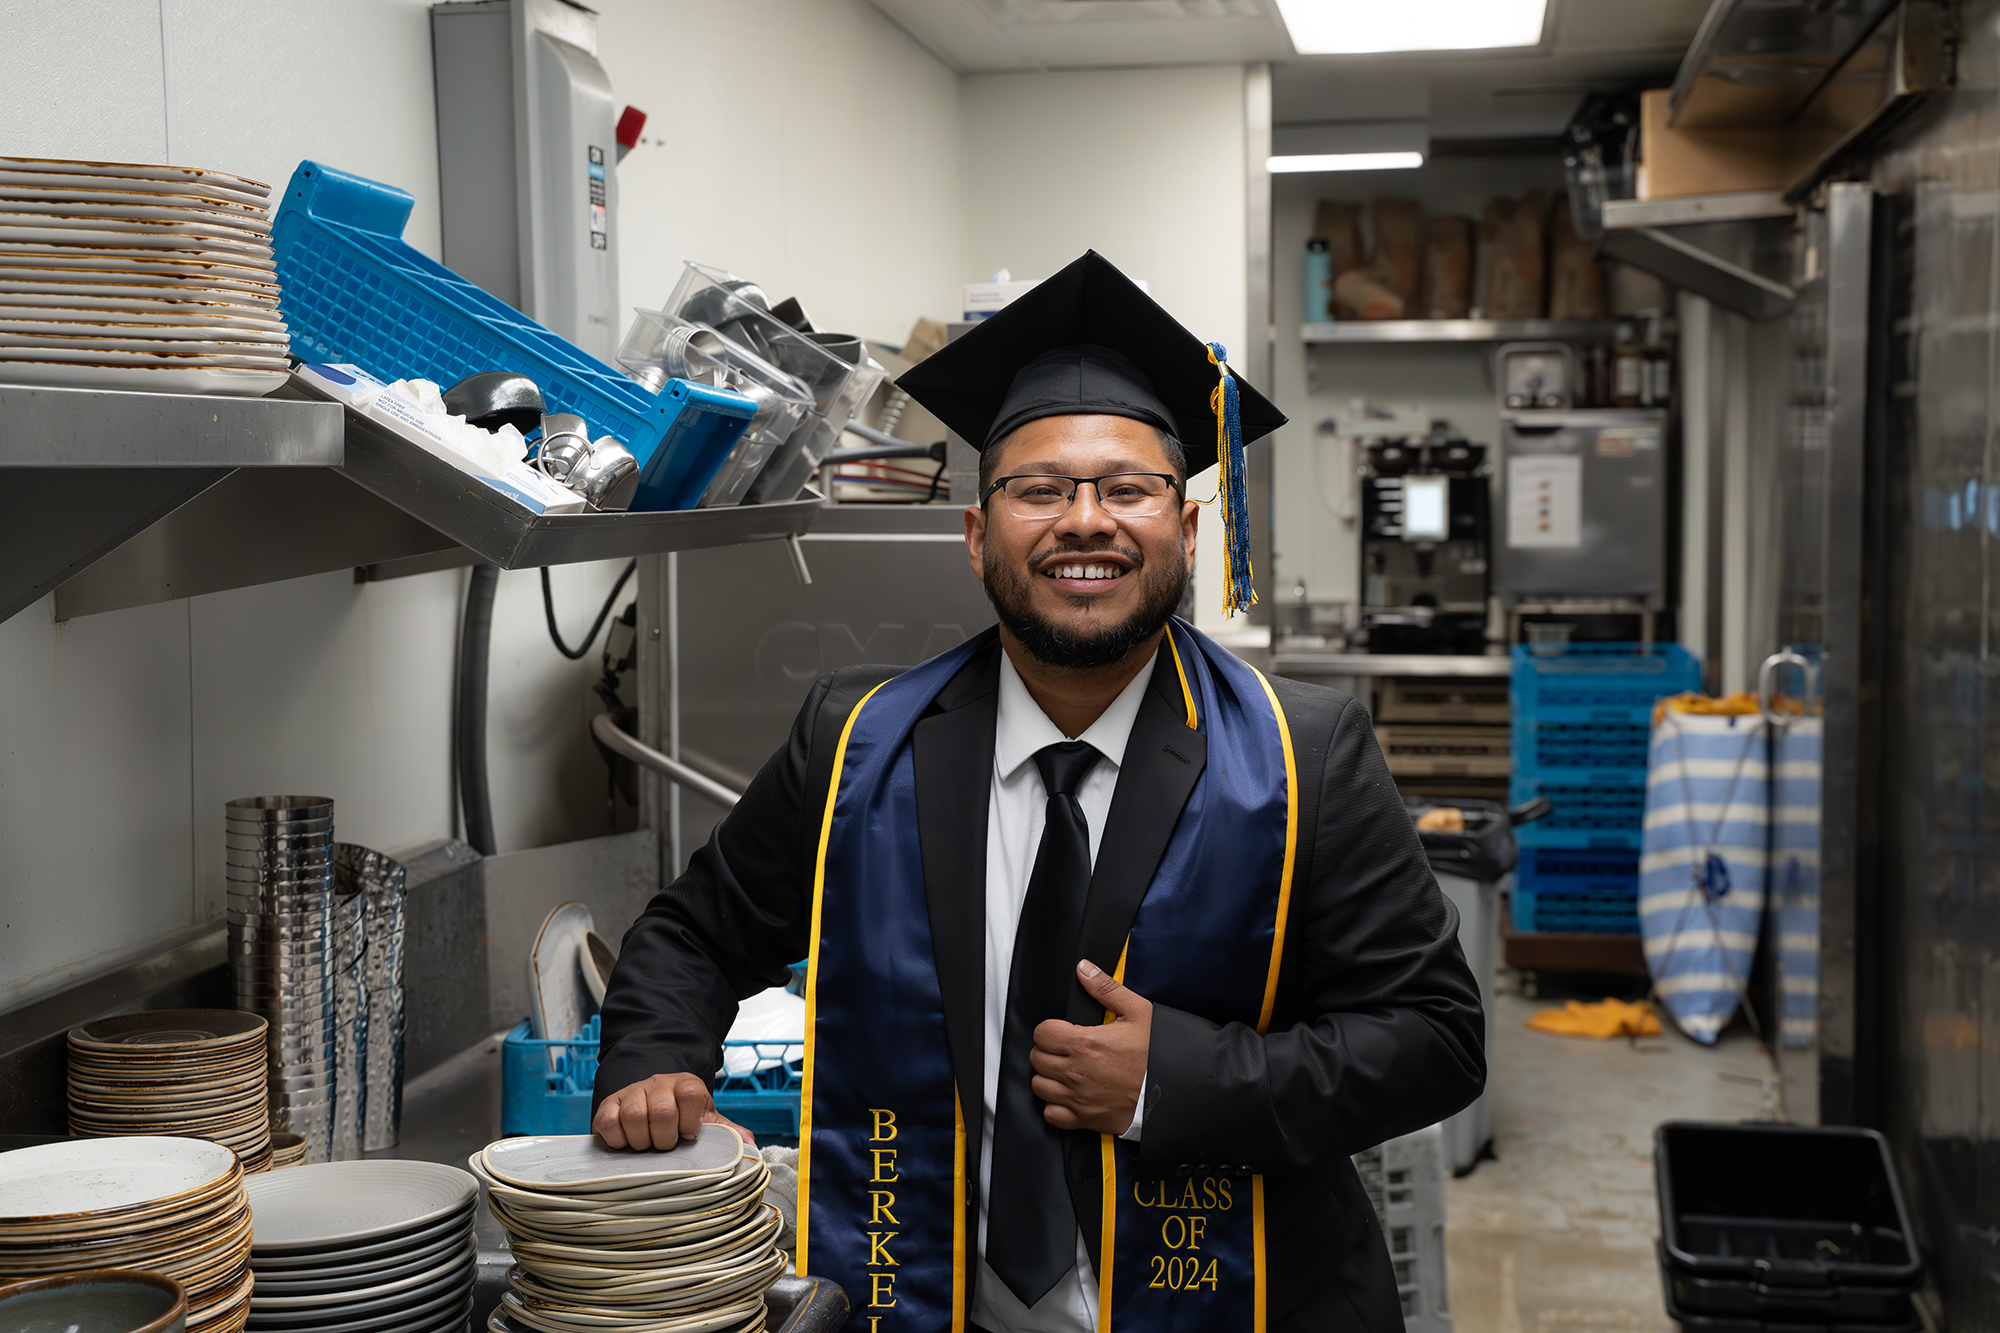 A bearded graduate in cap, gown and stole poses, smiling, in a commercial kitchen